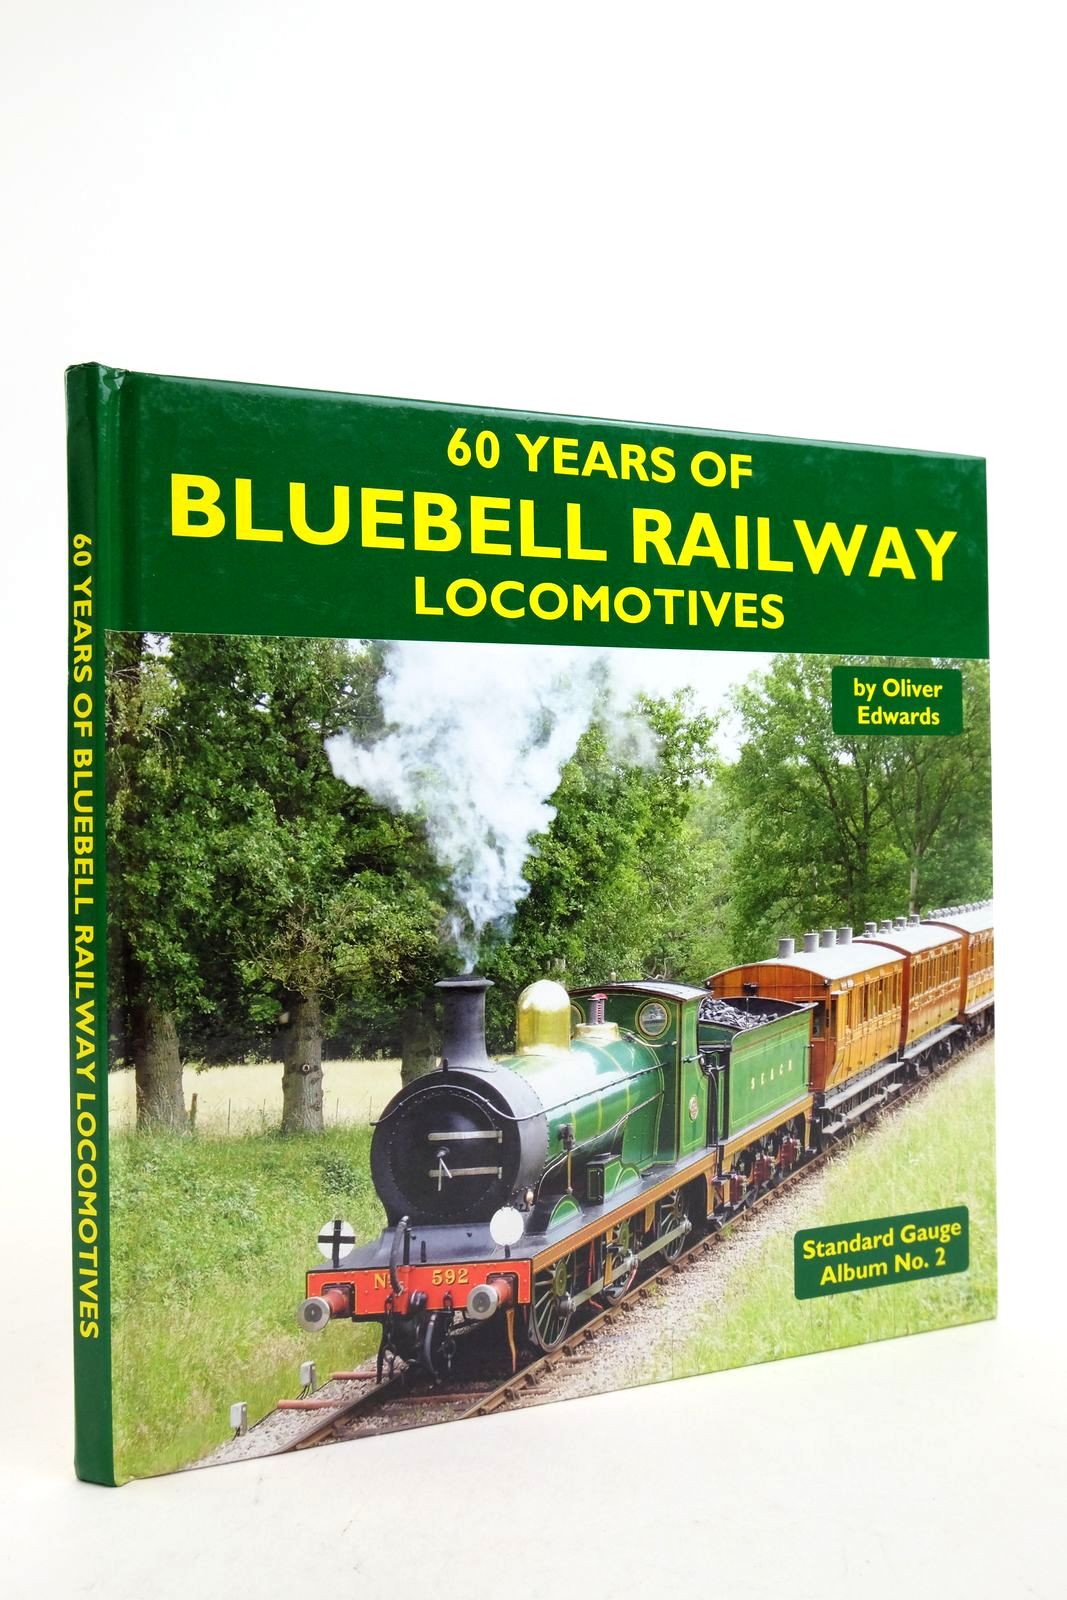 Photo of 60 YEARS OF BLUEBELL RAILWAY LOCOMOTIVES written by Edwards, Oliver published by Mainline & Maritime Ltd (STOCK CODE: 2139489)  for sale by Stella & Rose's Books